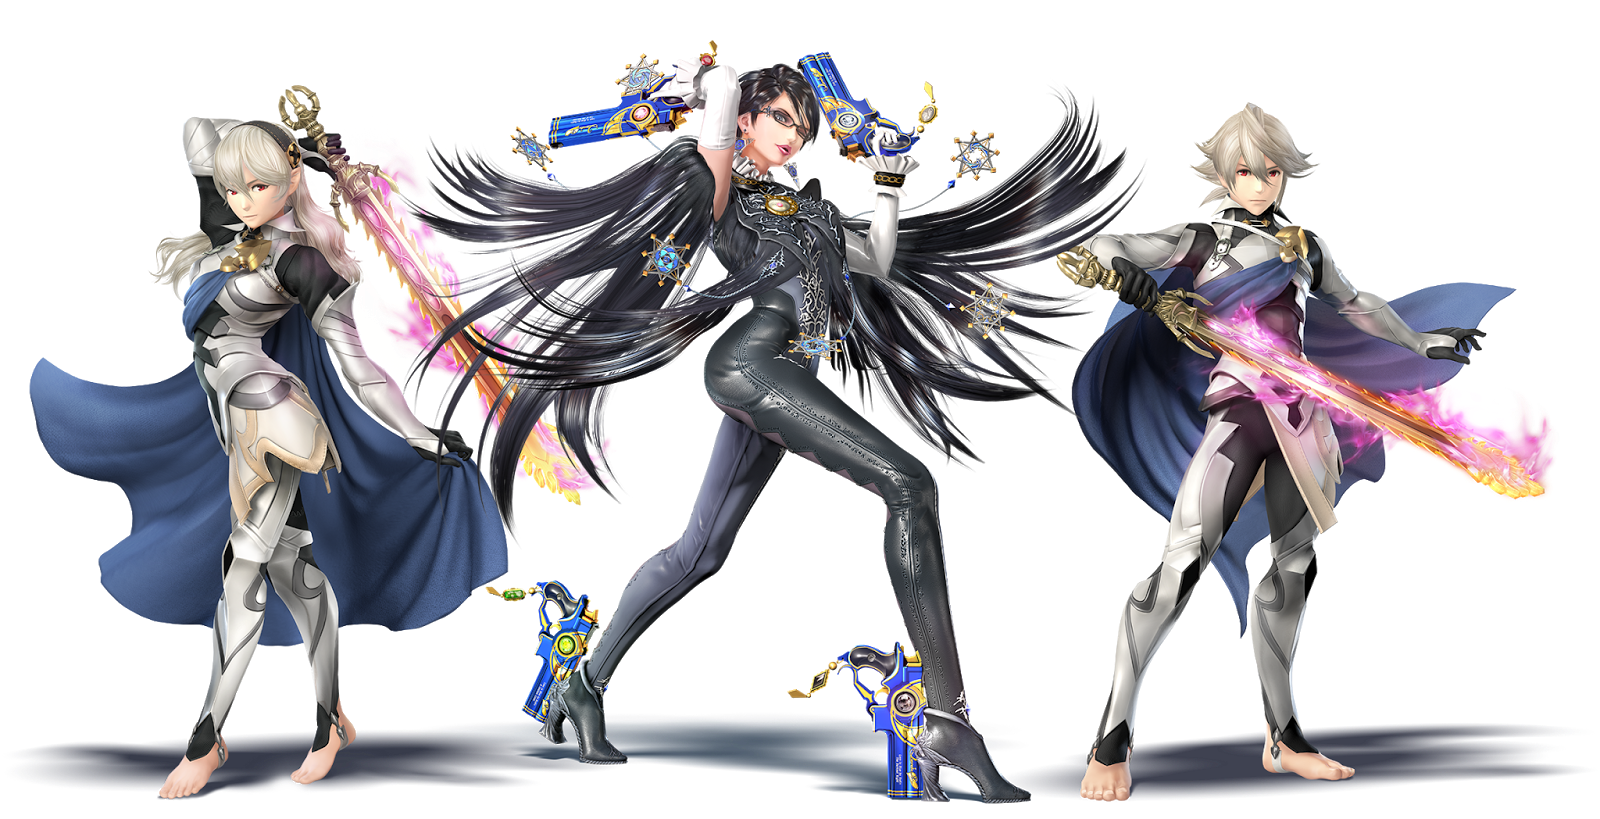 Bayonetta is final Super Smash Bros. 3DS and Wii U DLC character